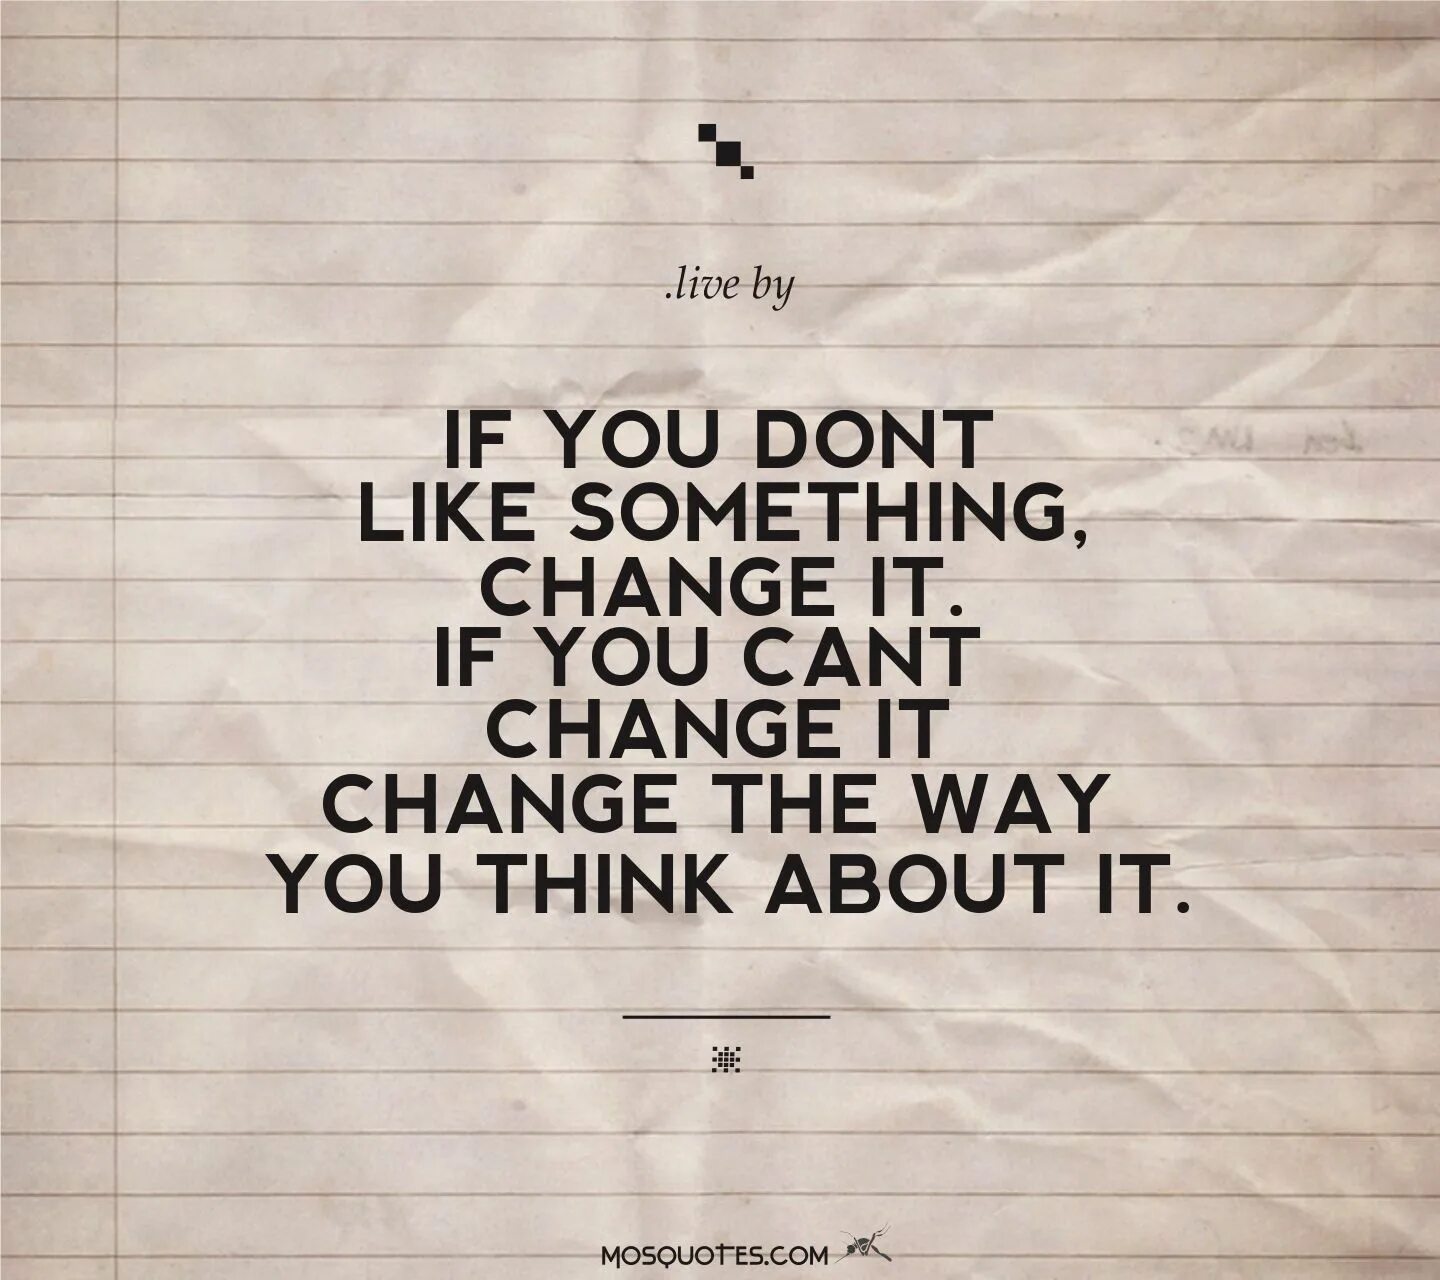 Life of something. Change quotes. Quotes about changes. Quotes about changes in Life. Quotes about changing yourself.